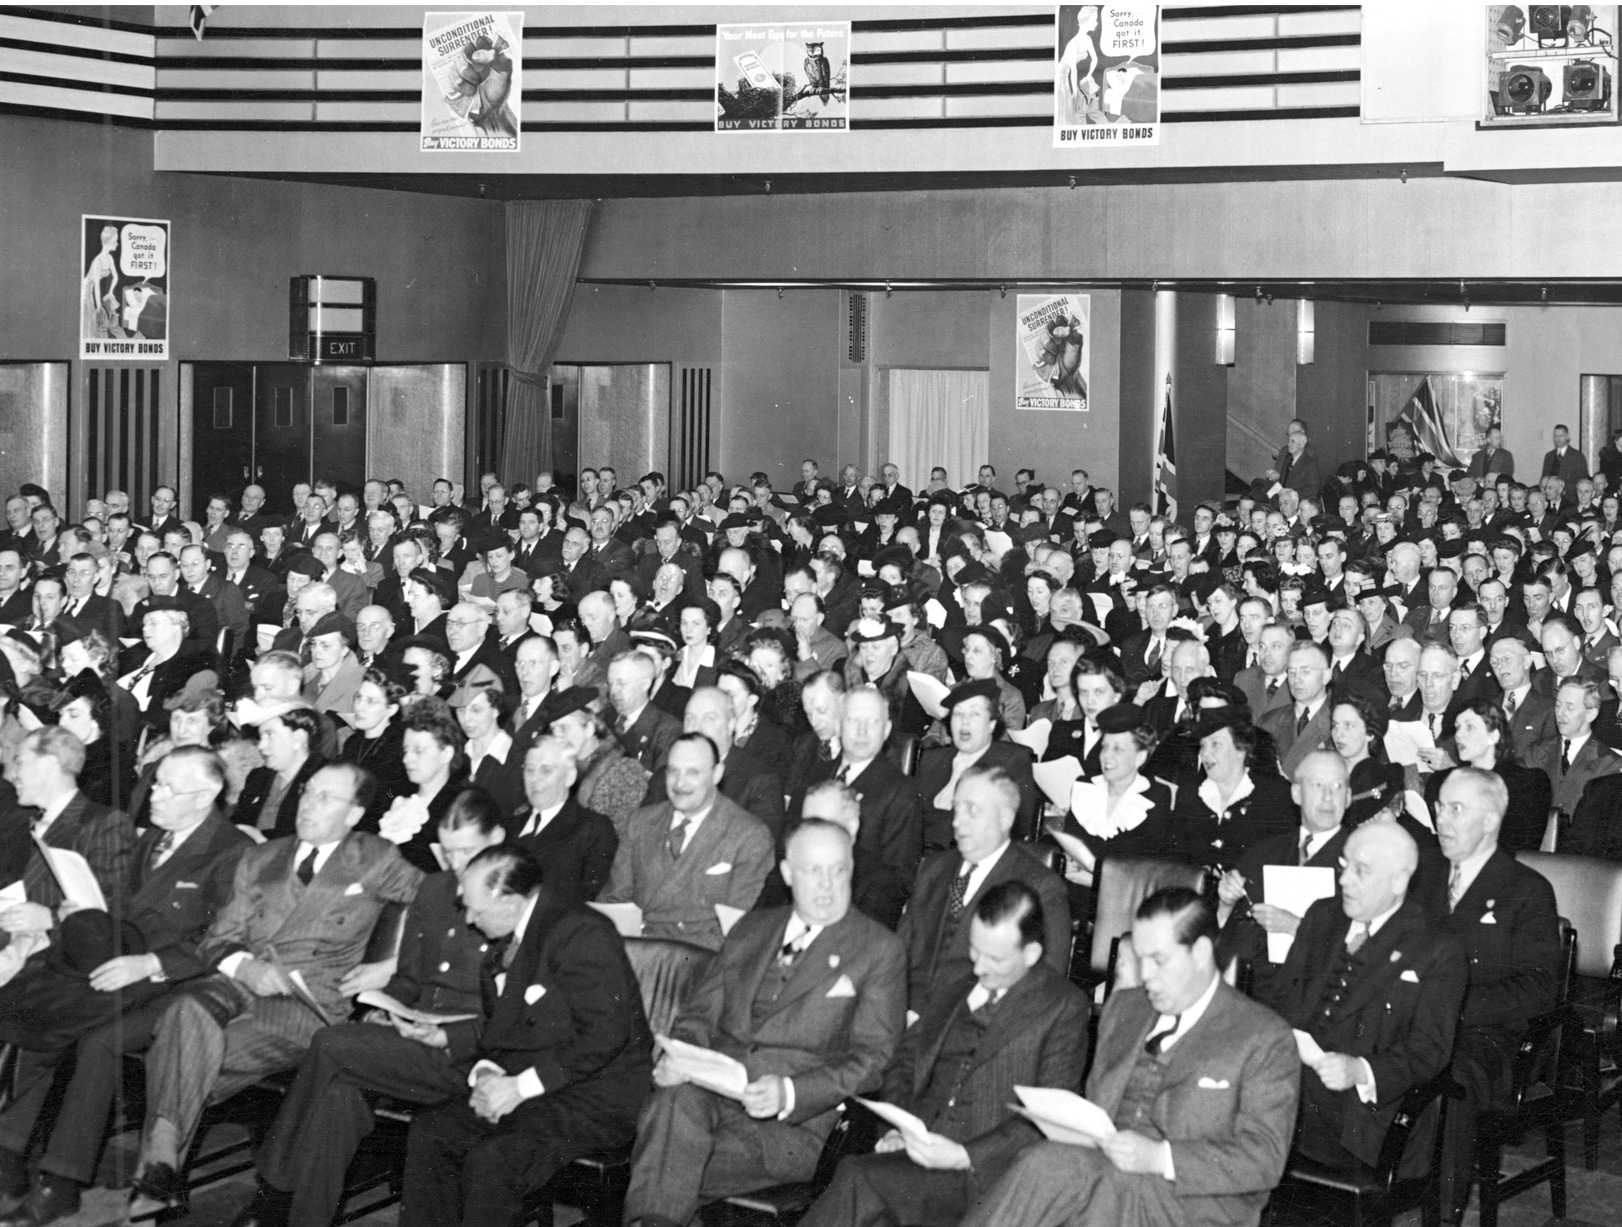 Black and white photo of an audience sitting in a theatre featuring Art Deco decoration. Every seat is full. Photo dates to 1943.